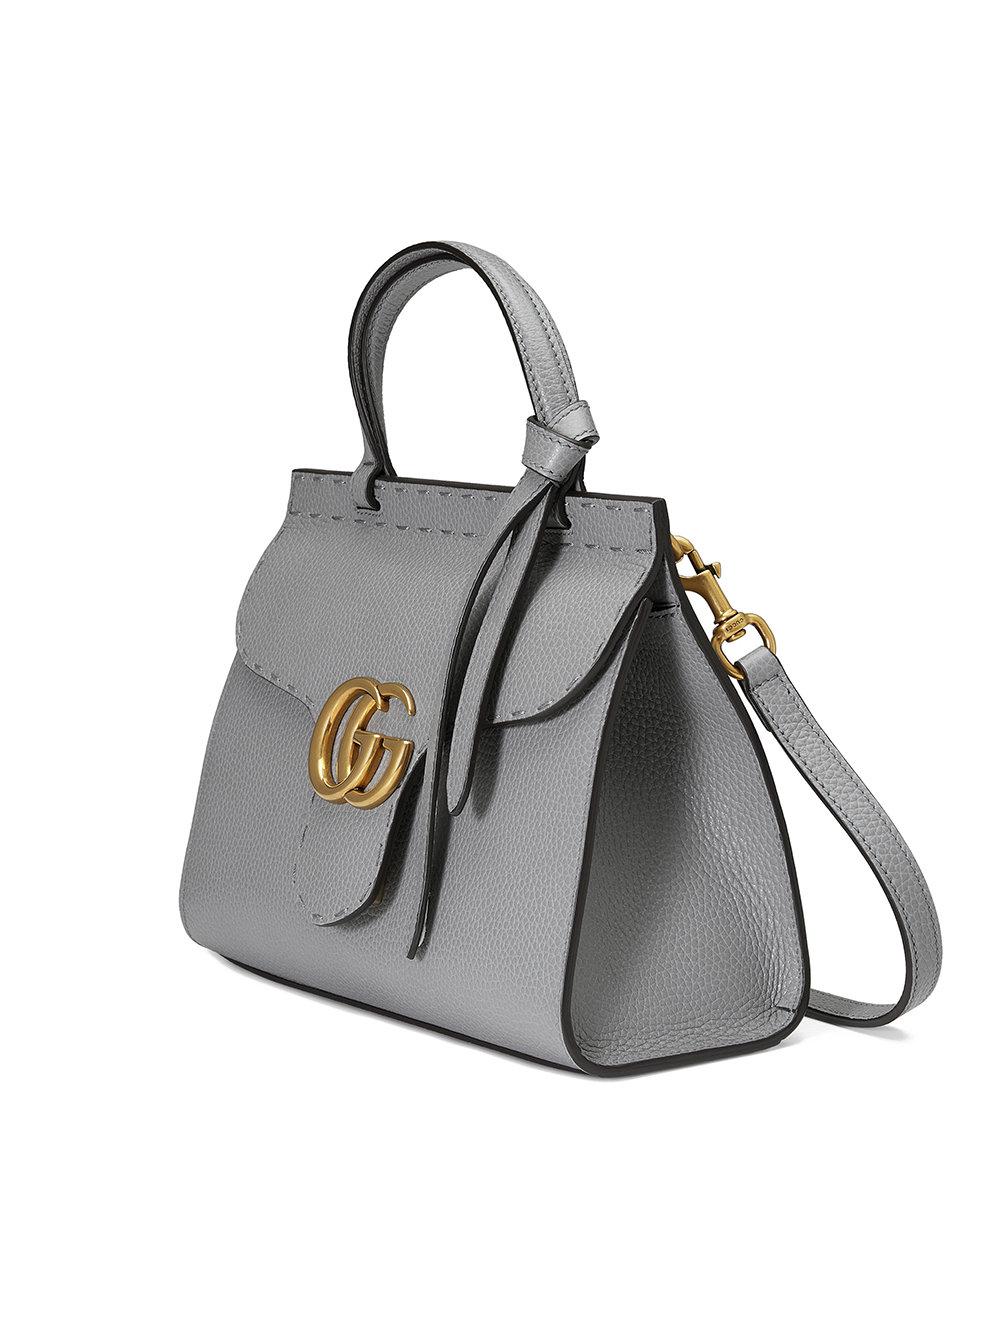 Gucci Gg Marmont Leather Top Handle Mini Bag in Grey | Lyst Canada